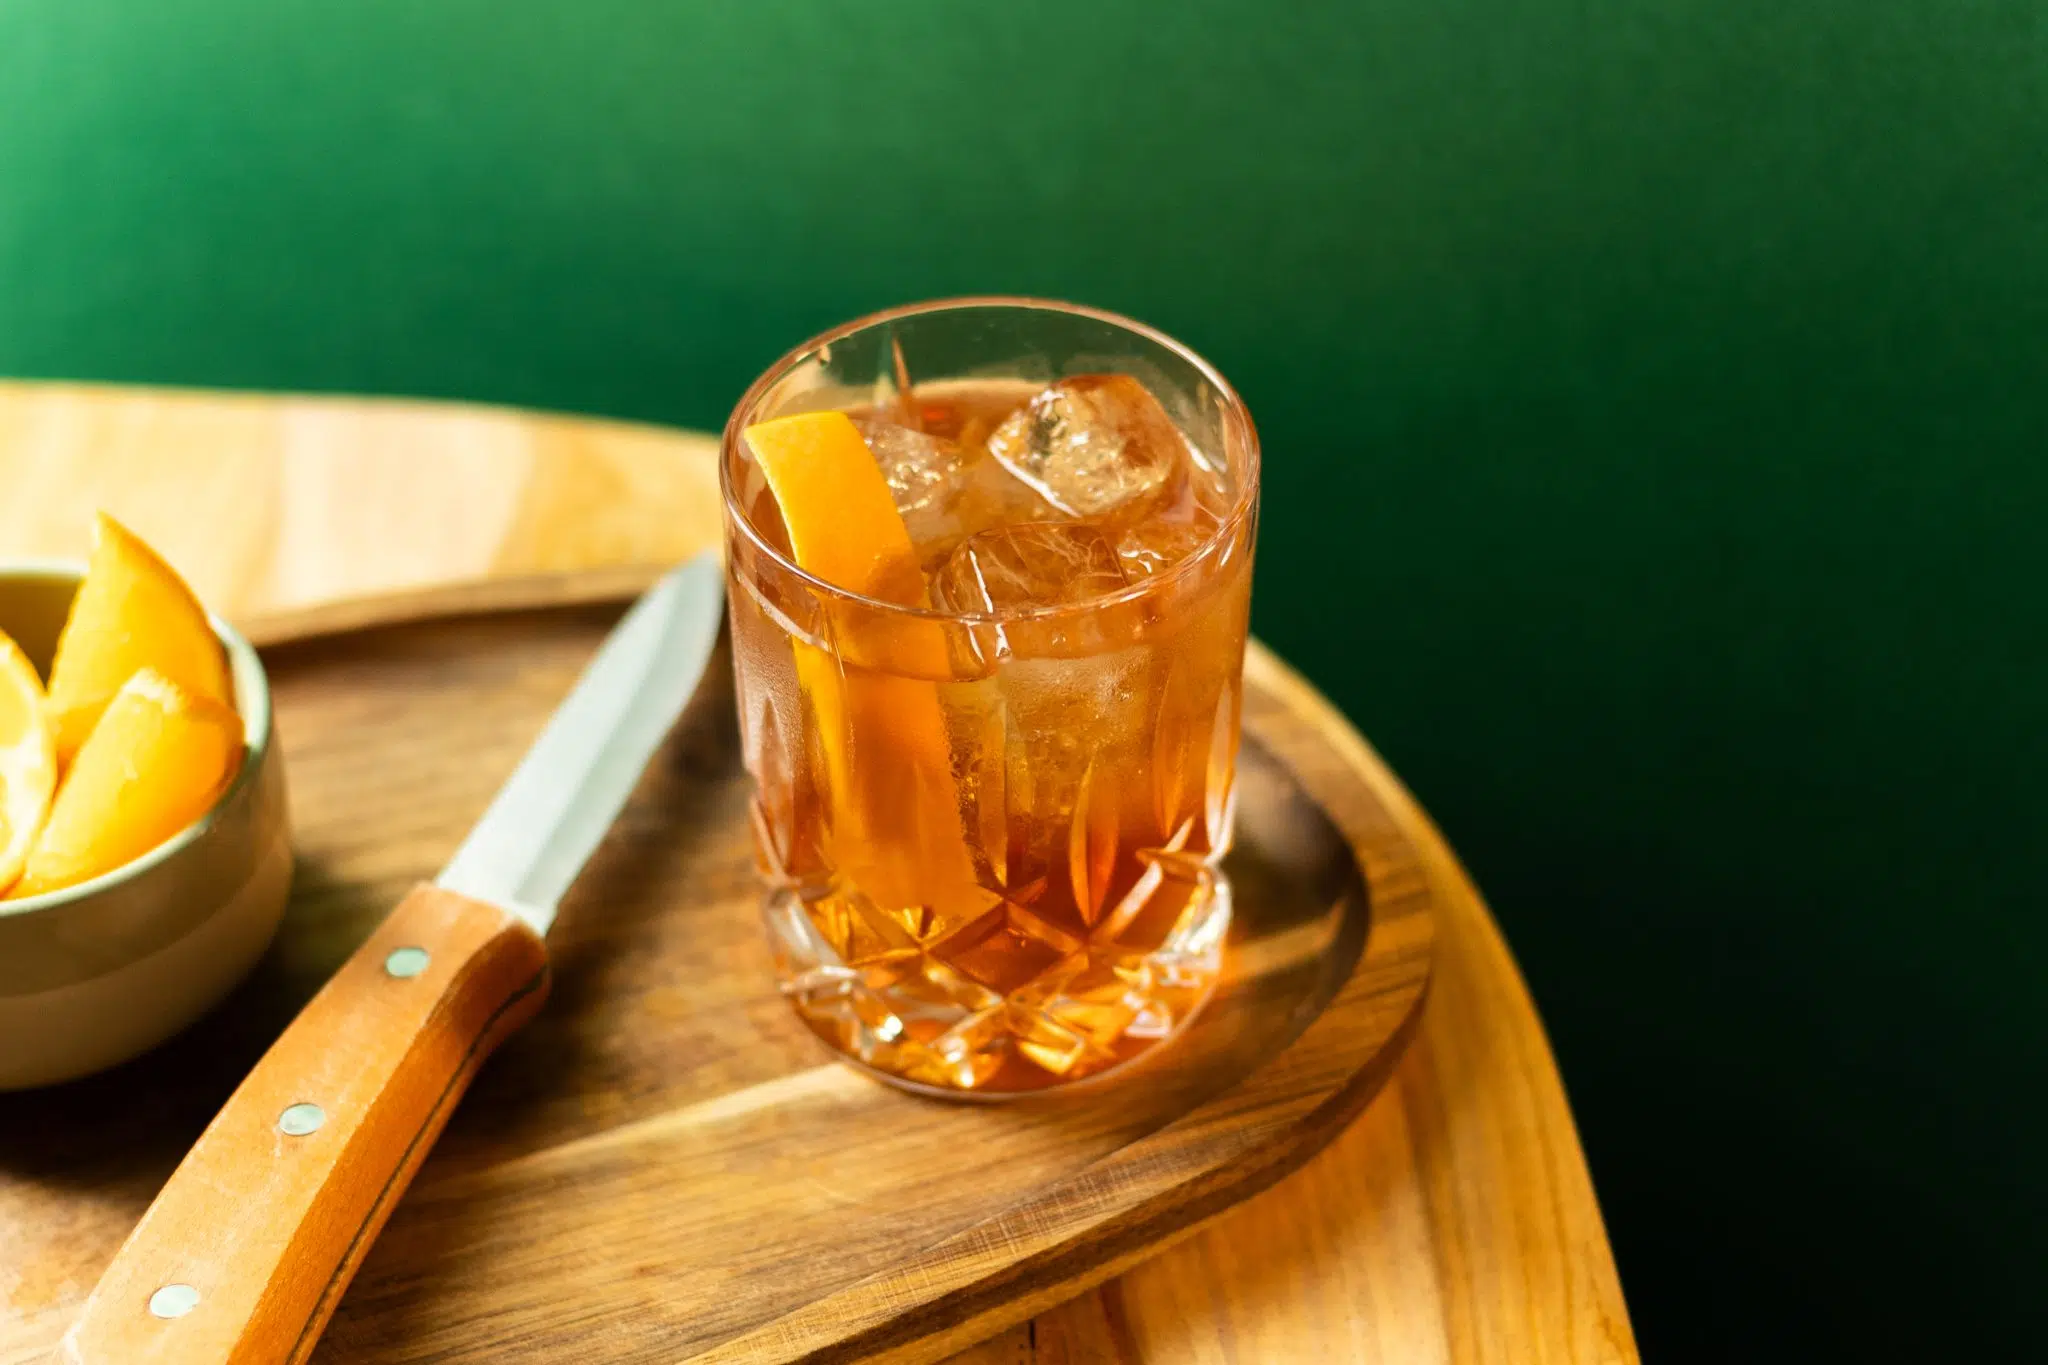 A high angle shot of a Maple Old Fashioned cocktail in an old fashioned glass on a wooden board on a wooddedn table with a knife and a bowl with orange wedges around, in front of a green background.